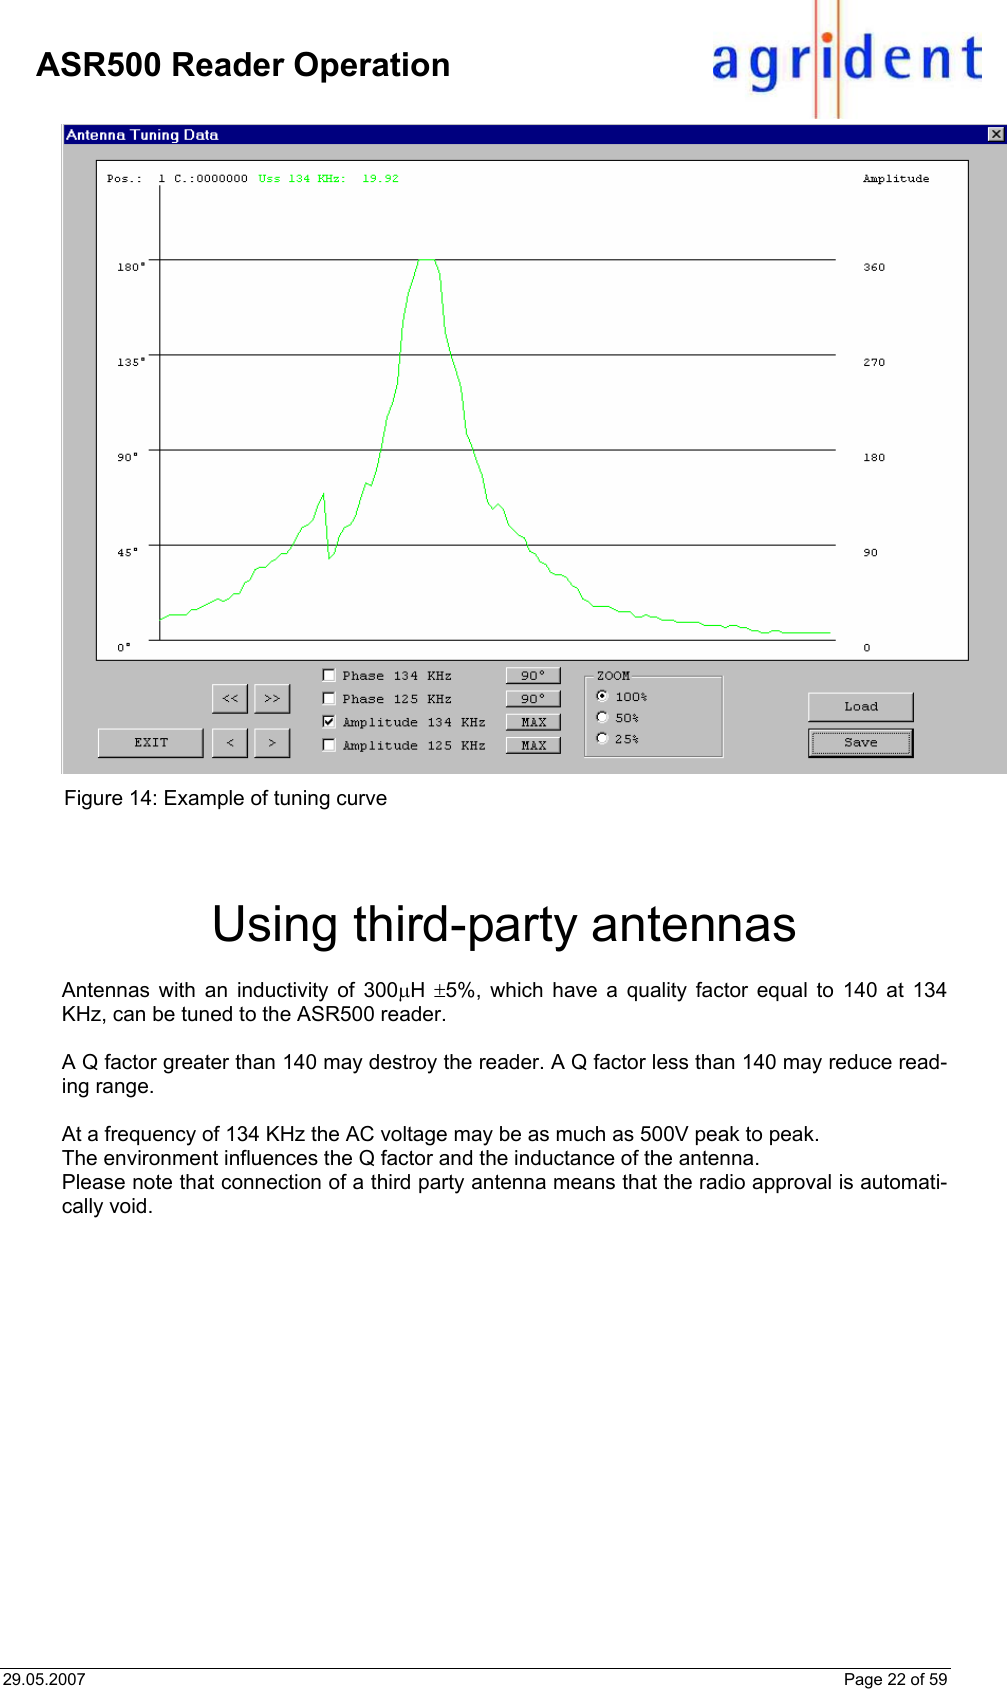 29.05.2007    Page 22 of 59     ASR500 Reader Operation  Figure 14: Example of tuning curve    Using third-party antennas  Antennas with an inductivity of 300µH  ±5%, which have a quality factor equal to 140 at 134 KHz, can be tuned to the ASR500 reader.  A Q factor greater than 140 may destroy the reader. A Q factor less than 140 may reduce read-ing range.  At a frequency of 134 KHz the AC voltage may be as much as 500V peak to peak. The environment influences the Q factor and the inductance of the antenna.  Please note that connection of a third party antenna means that the radio approval is automati-cally void. 